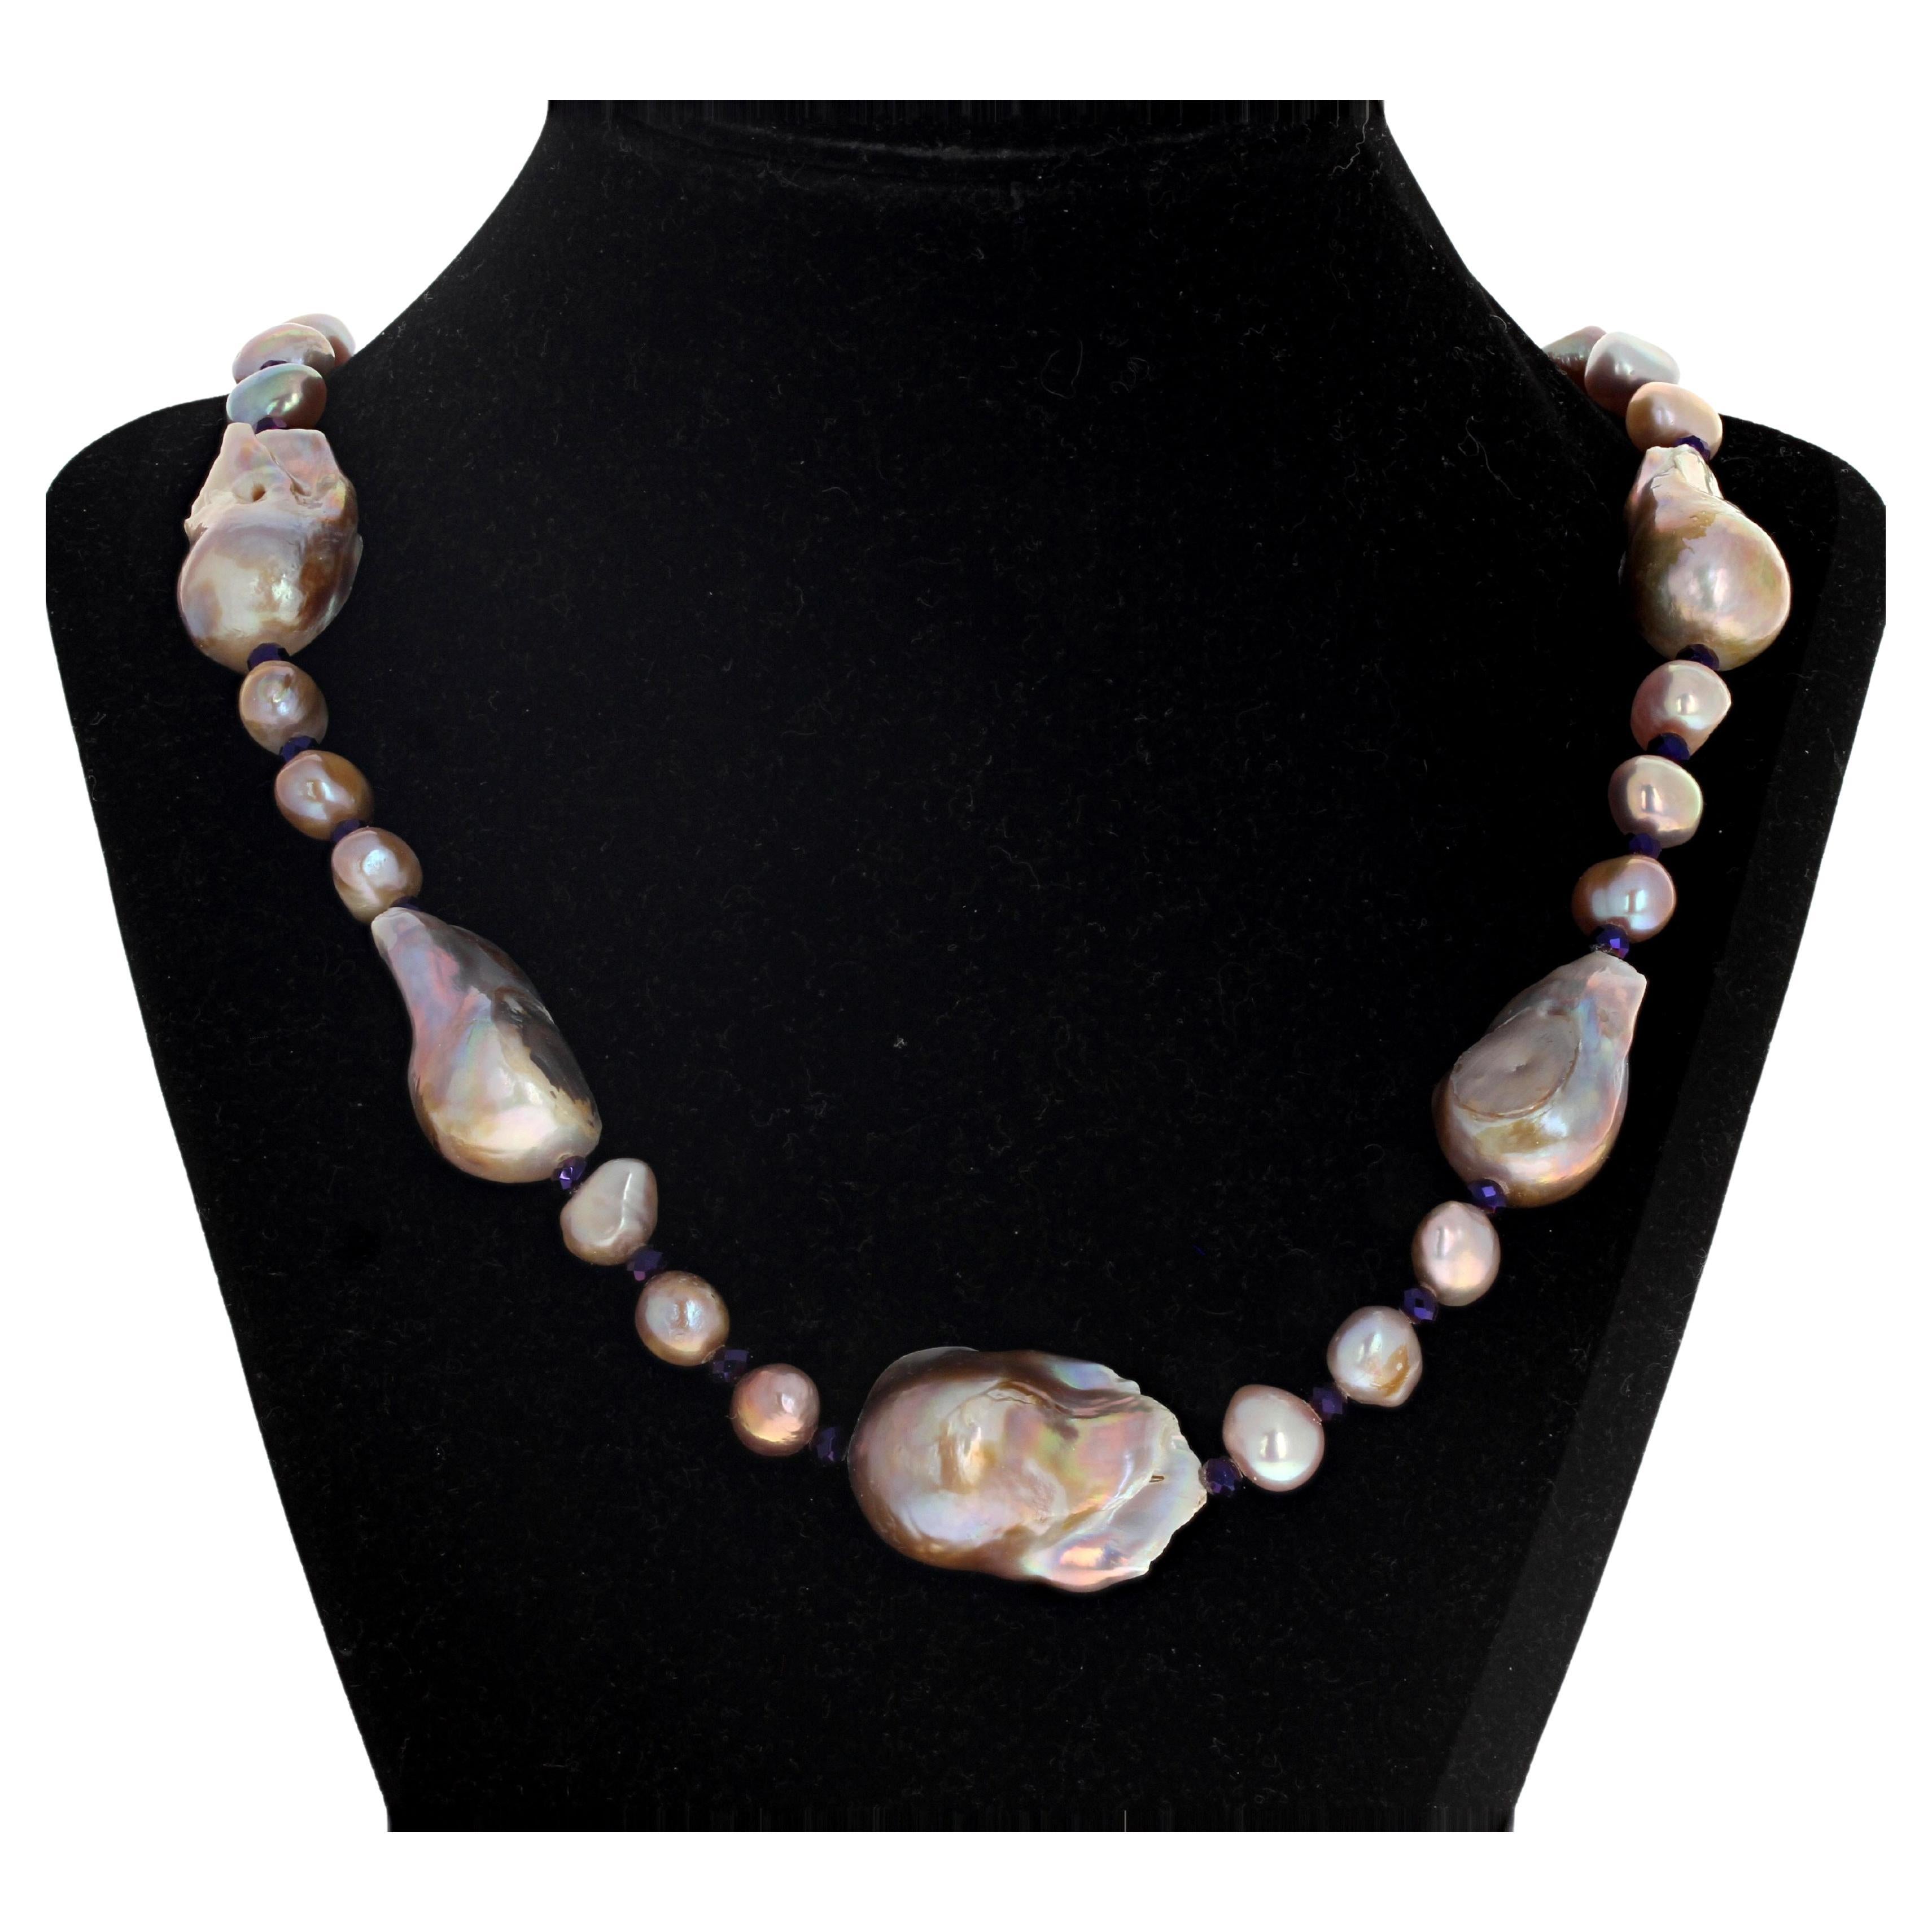 This necklace is 20 inches long and the Pearls are absolutely beautiful in their real multi-color reflections !!  The larger ones are approximately 30 mm long.  The smaller ones are approximately 10mm.  The necklace is 20 inches long and the clasp